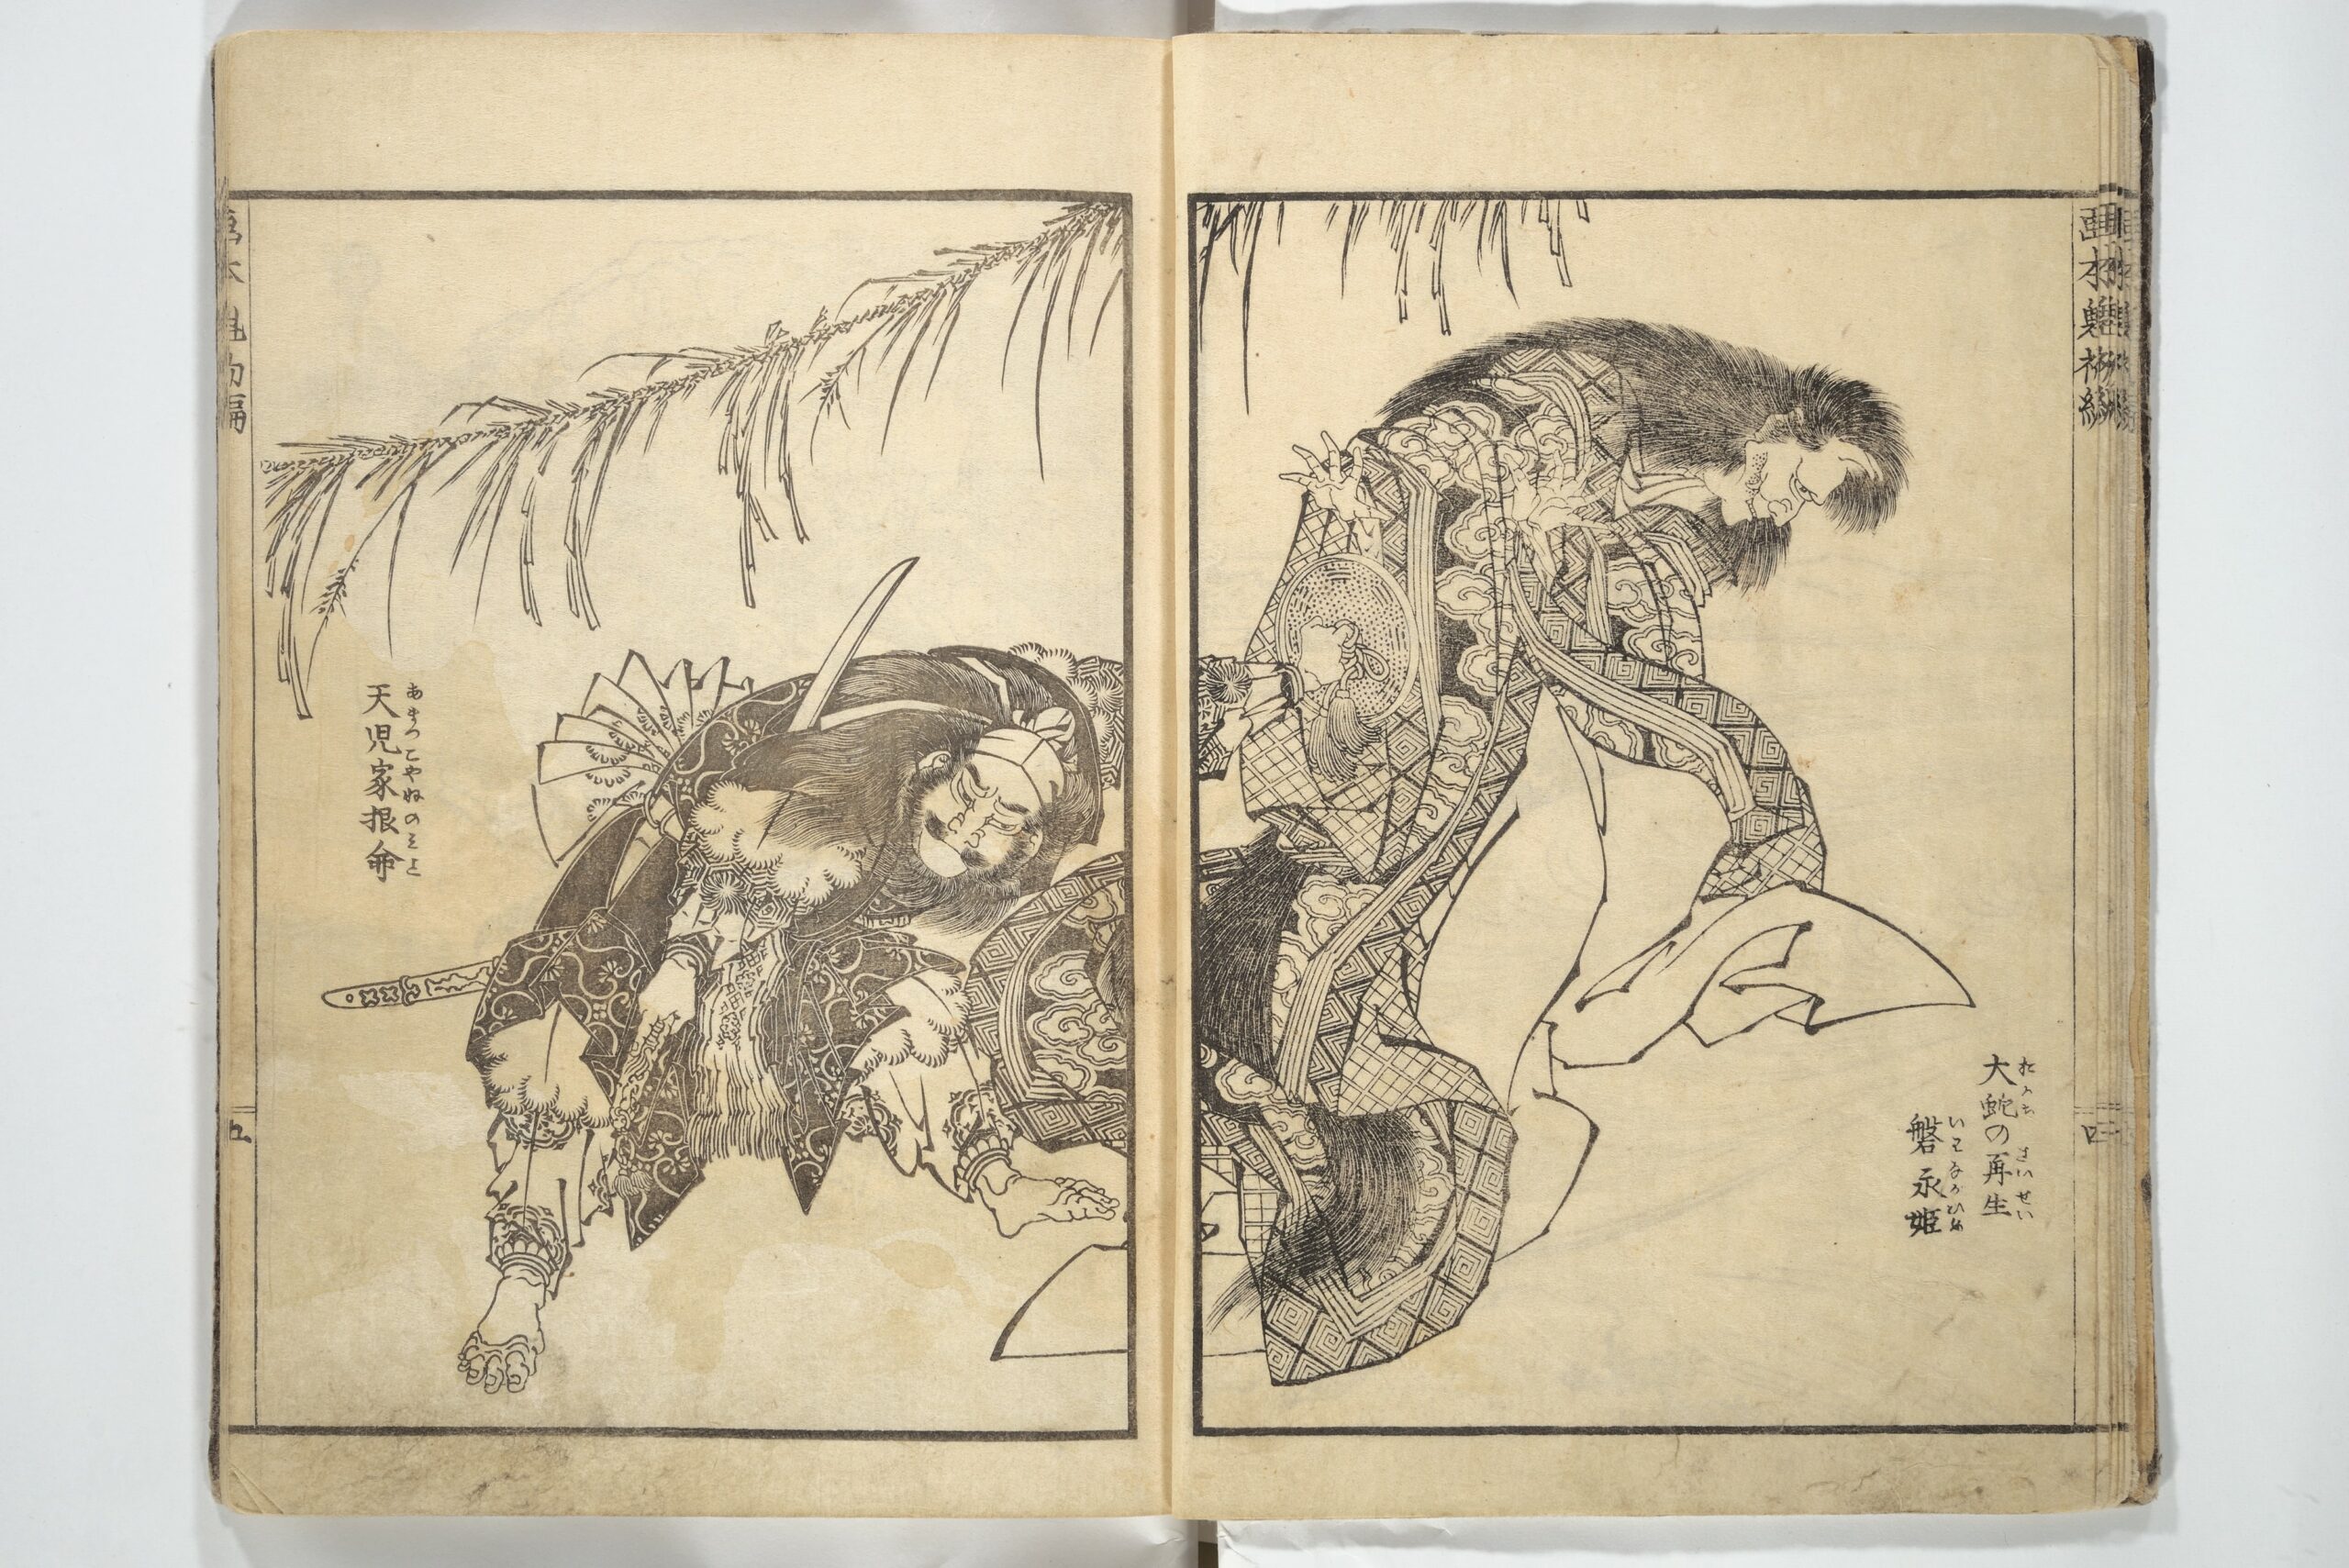 The Life of Animals in Japanese Art